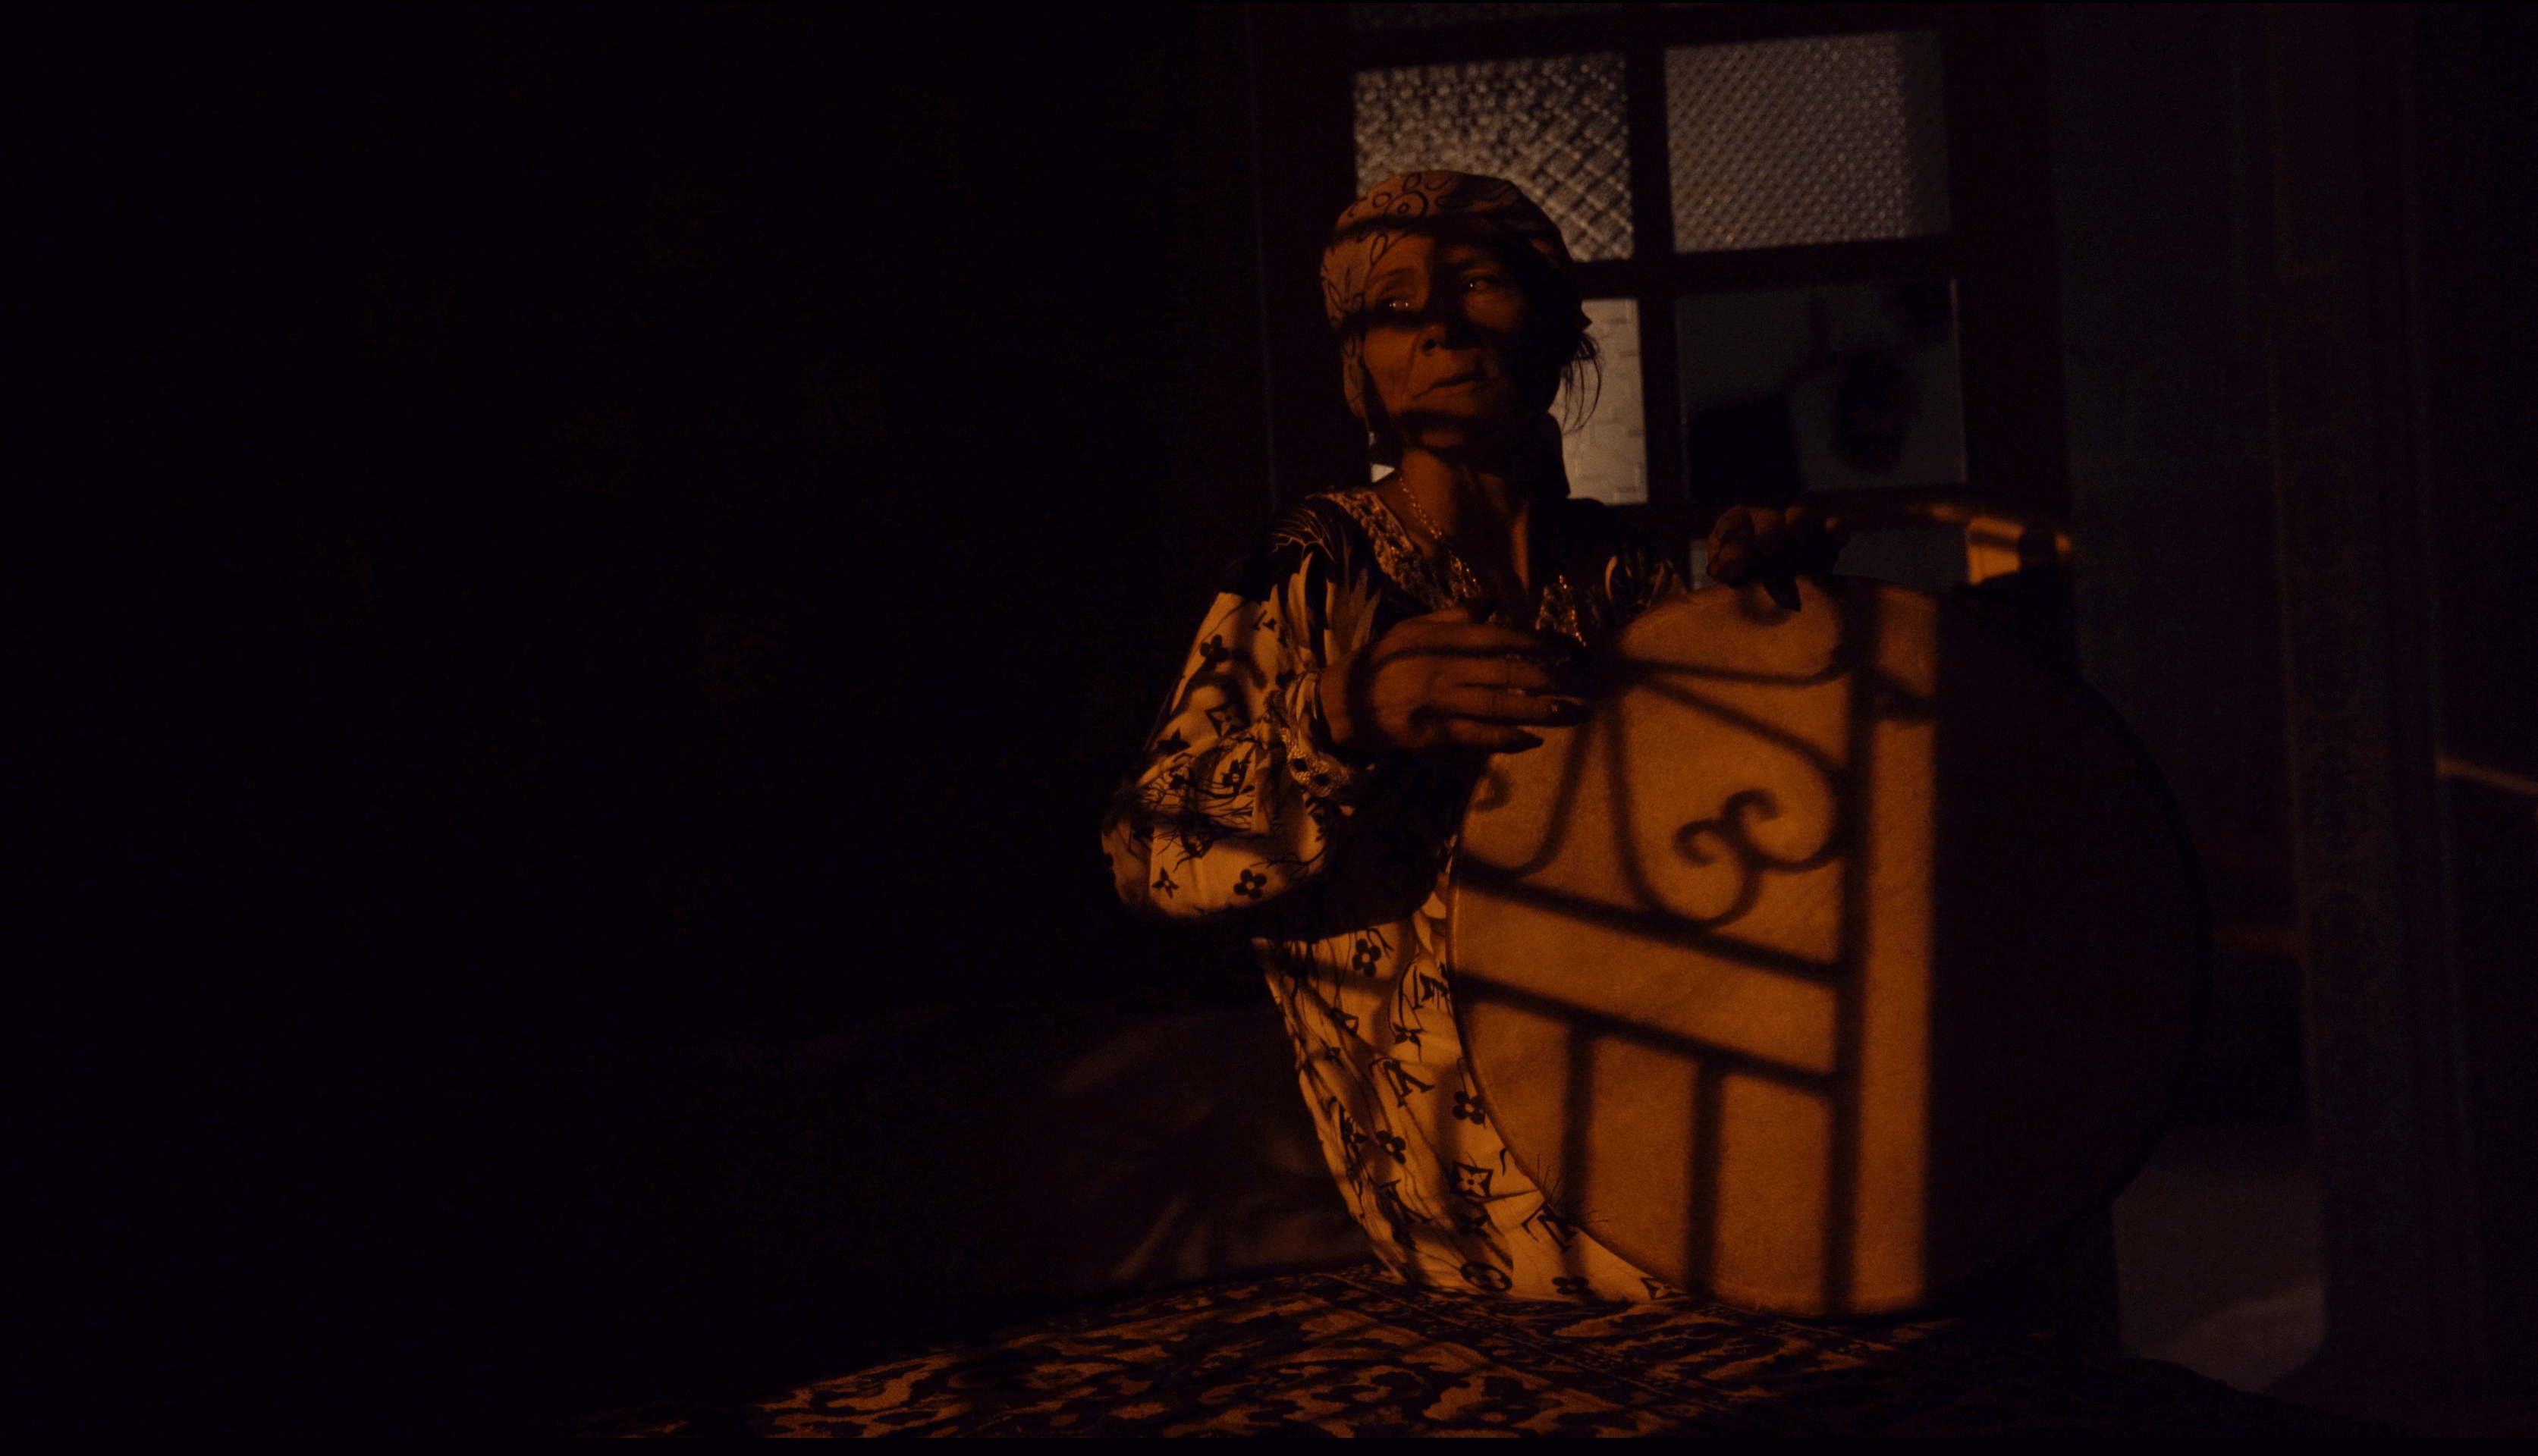 Still from Machtat. A woman sits in a dark room playing a drum.